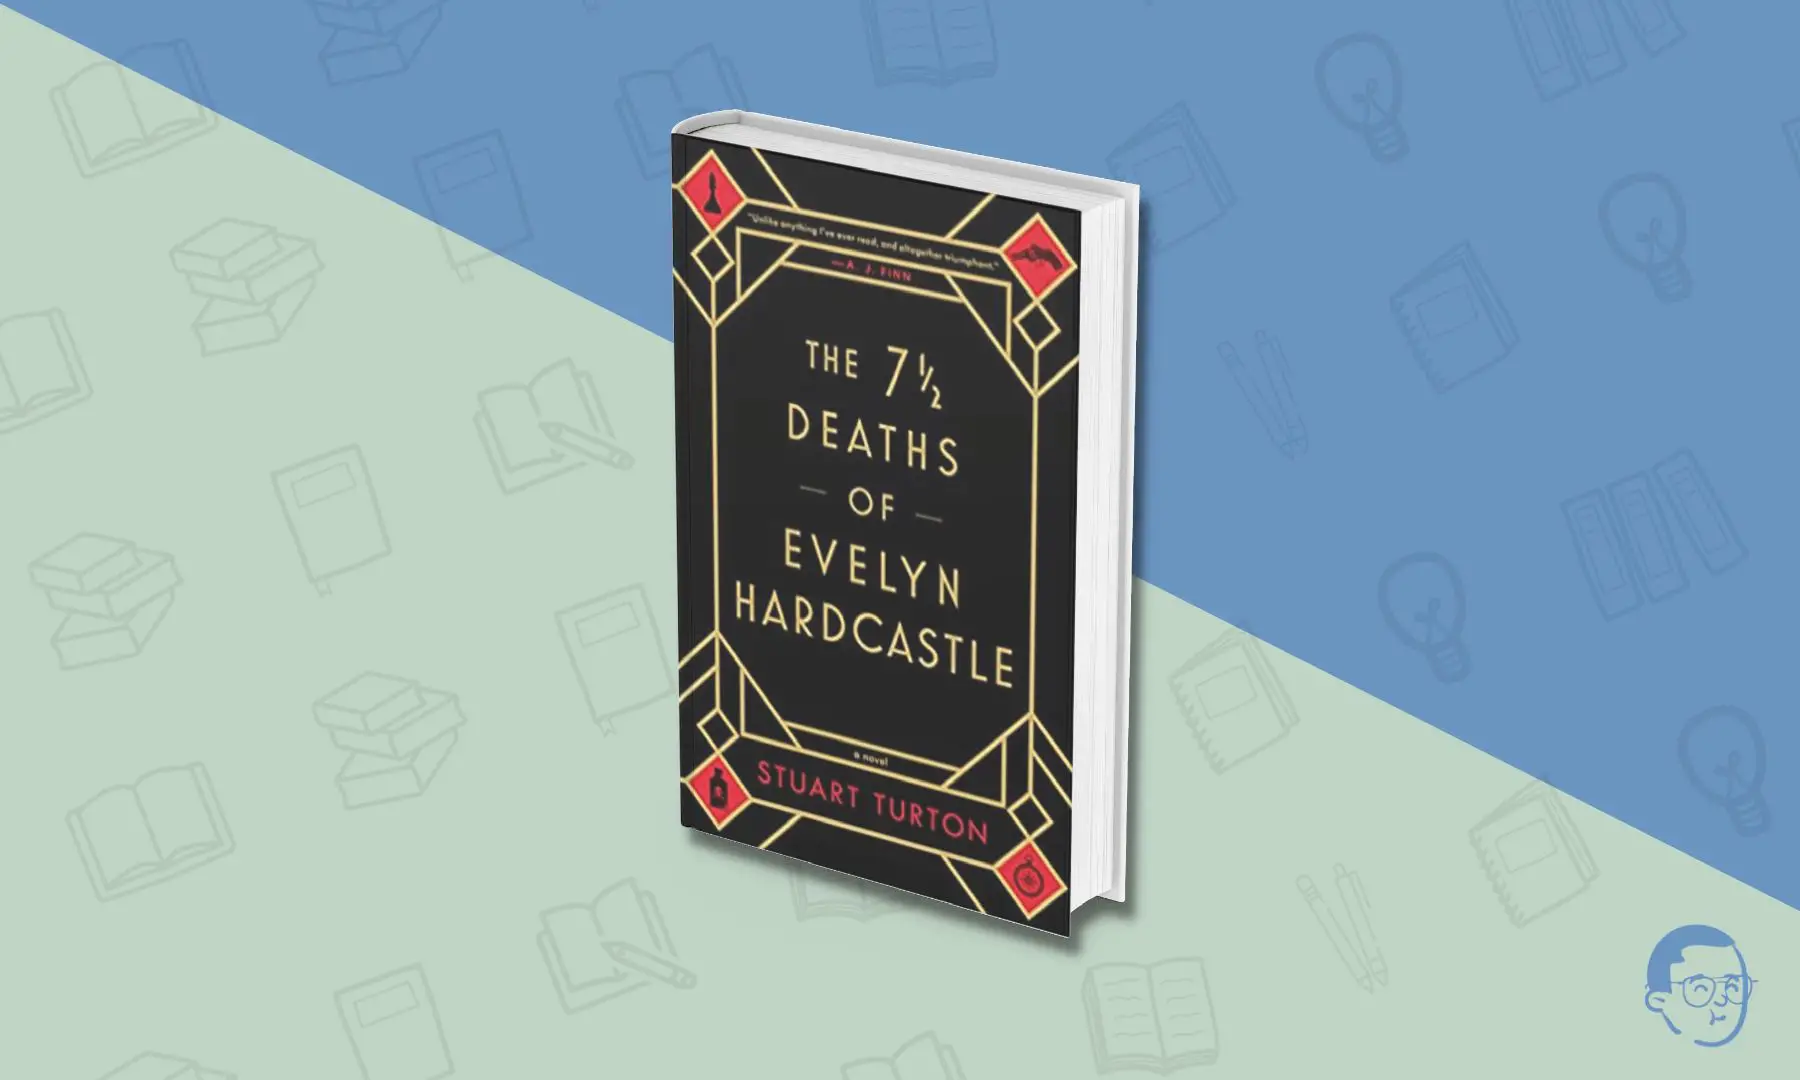 The 7,5 Deaths of Evelyn Hardcastle by Stuart Turton